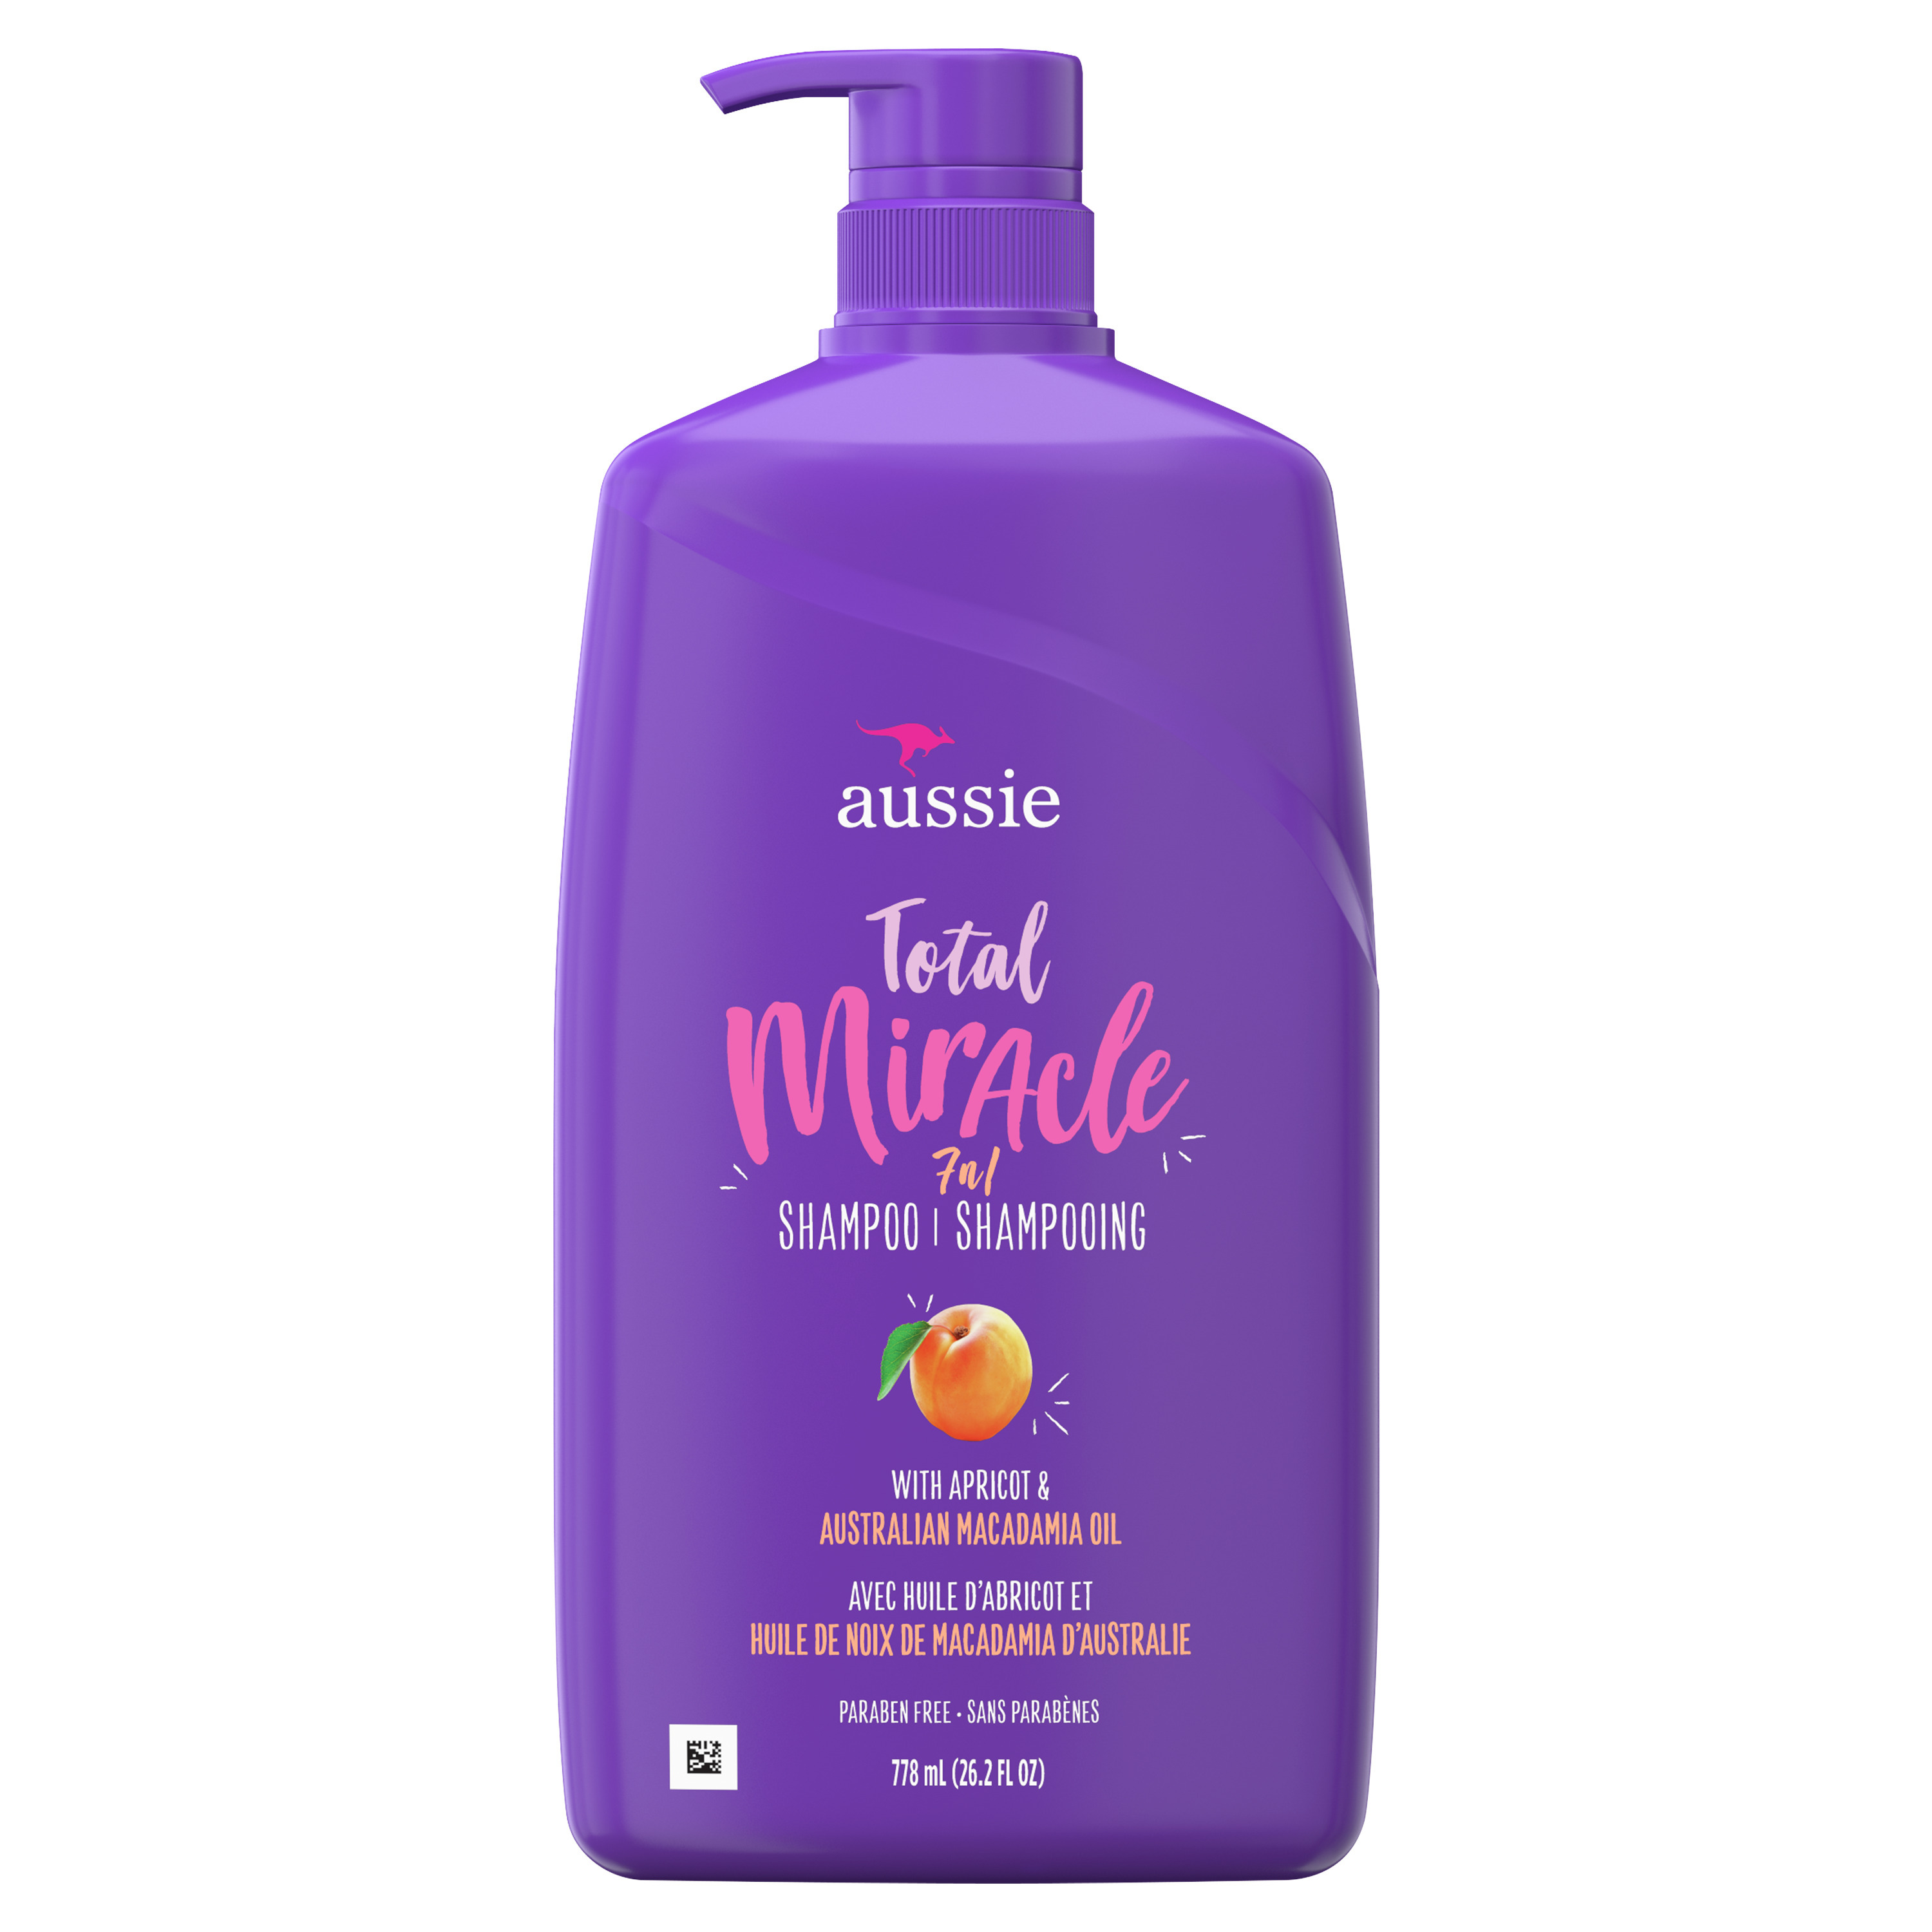 Aussie Total Miracle Shampoo, Paraben Free, for All Hair Types 26.2 fl oz - image 3 of 9